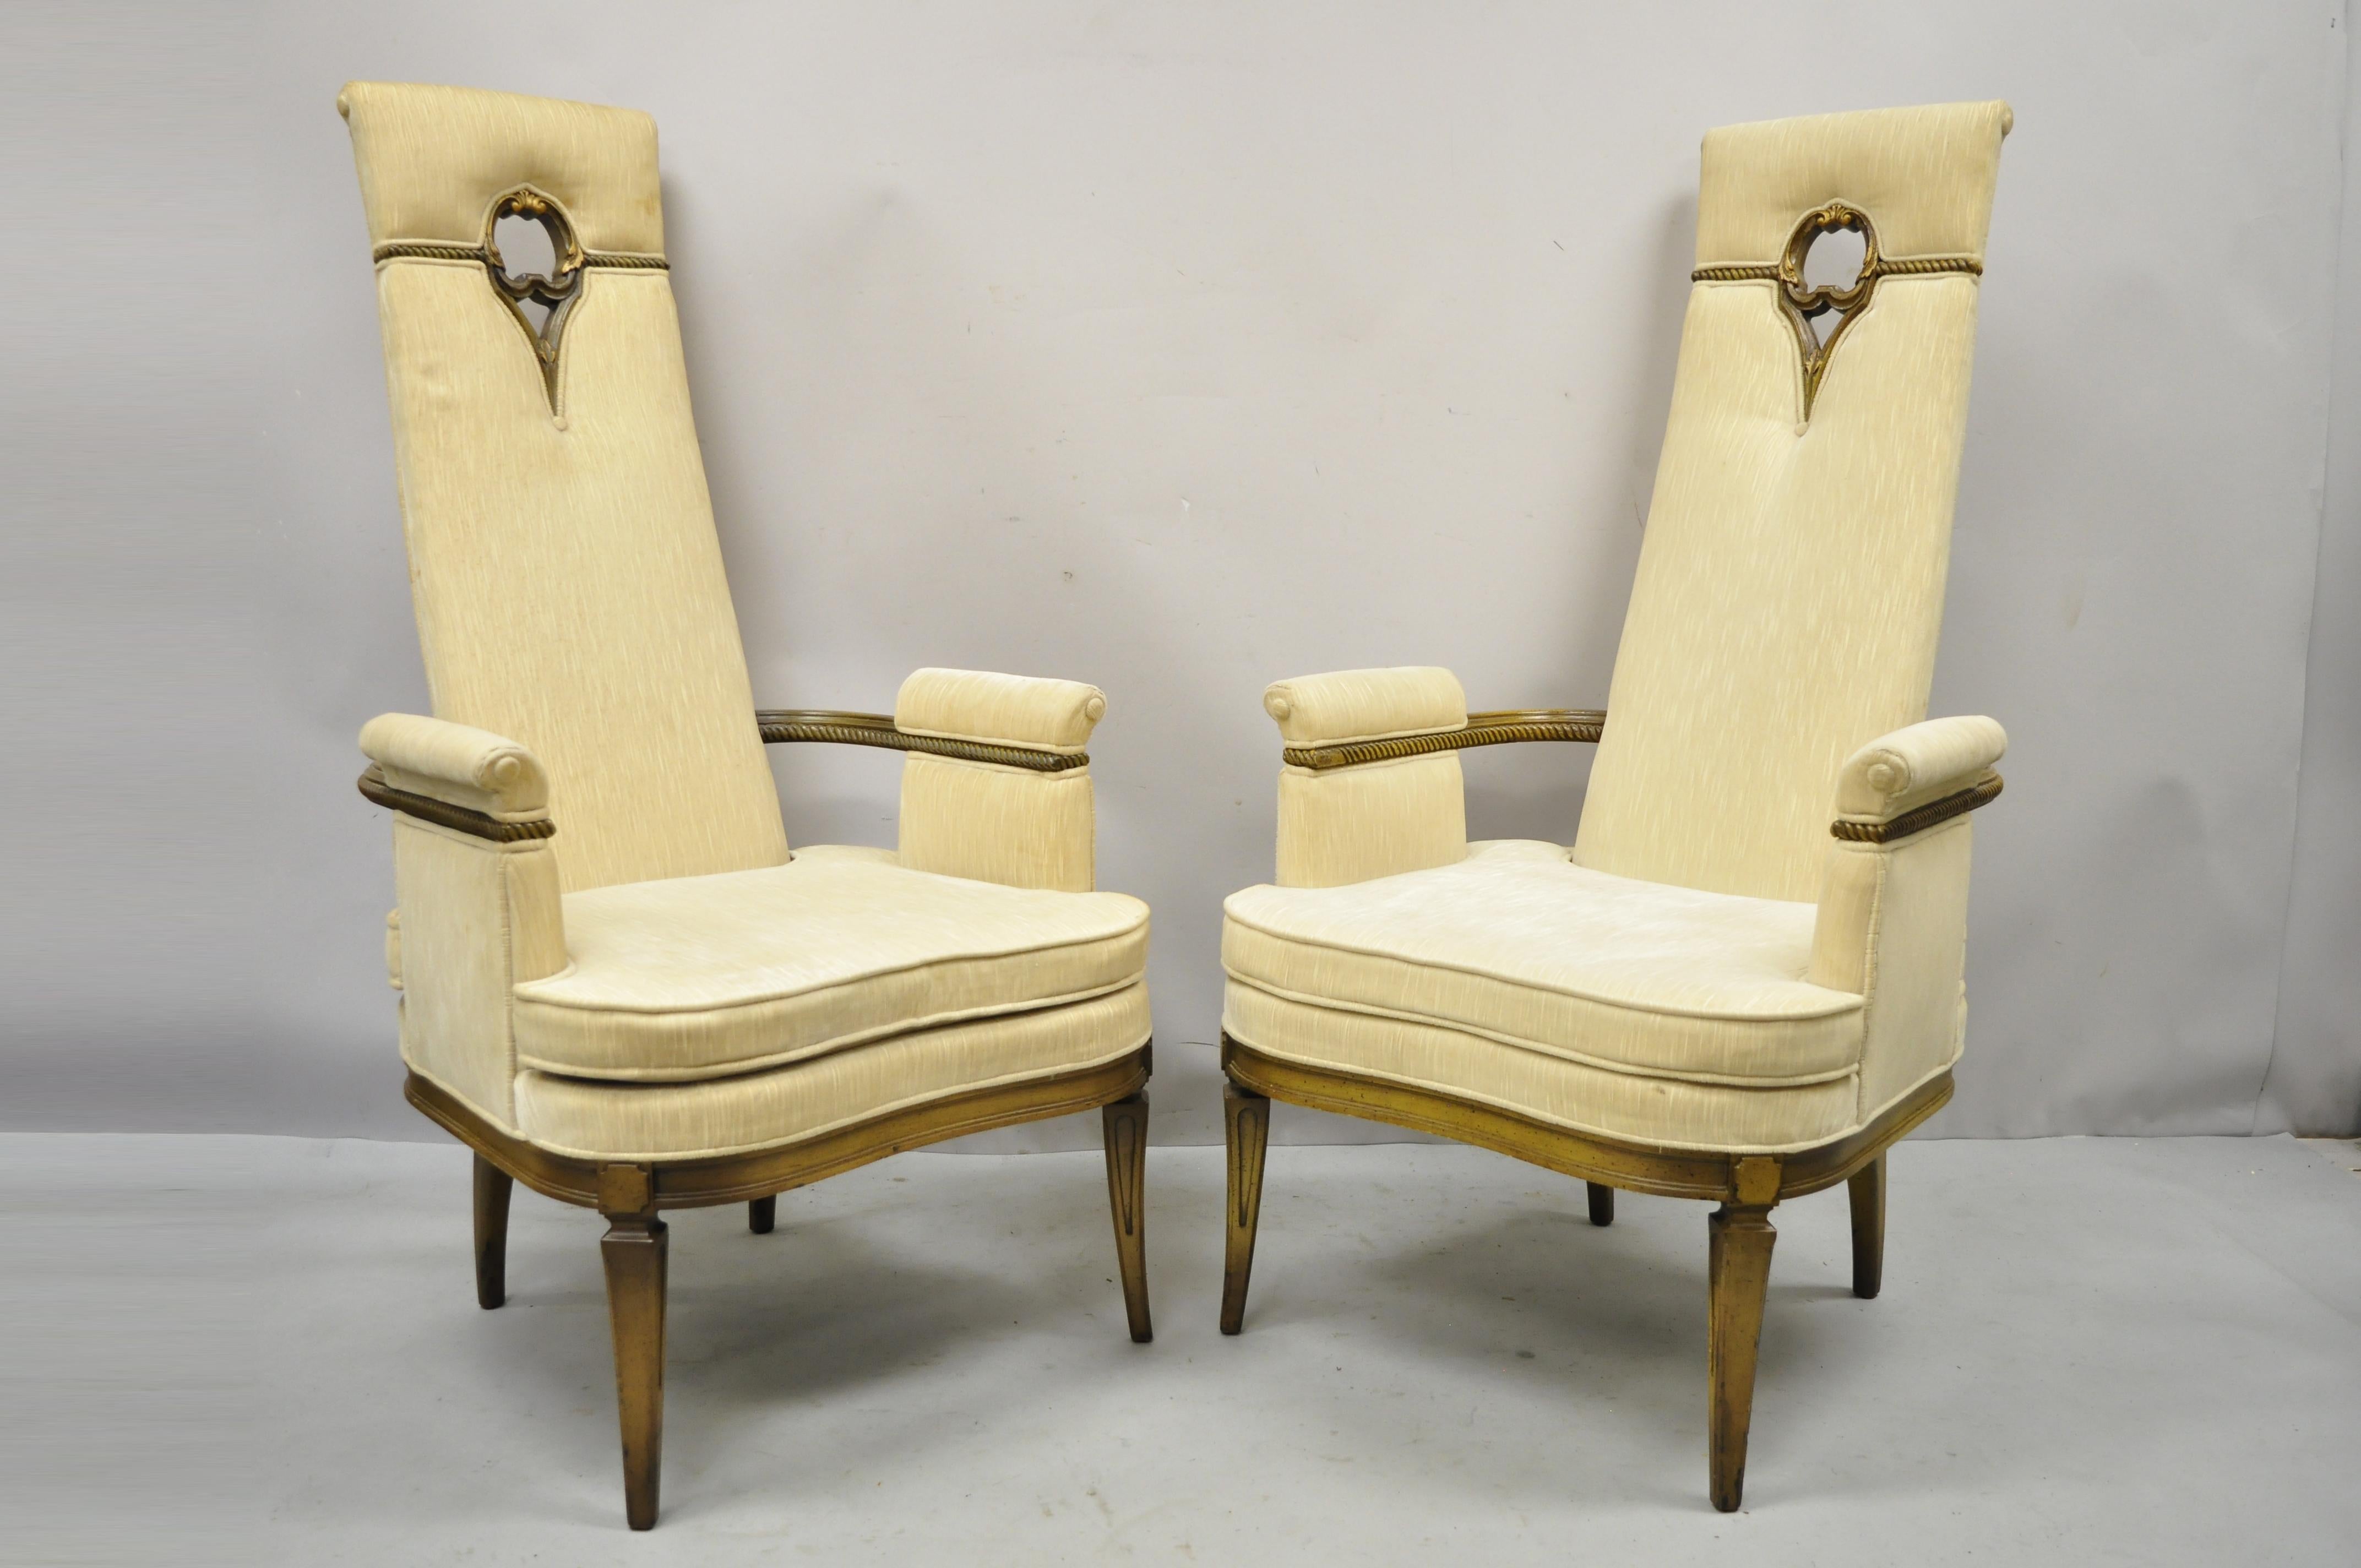 Vintage tall back Italian French Hollywood Regency lounge arm chairs - a Pair. Item features tall narrow backs with pierce carved wood cutouts, solid wood frames, upholstered arm rests, tapered legs, very nice vintage pair, great style and form,